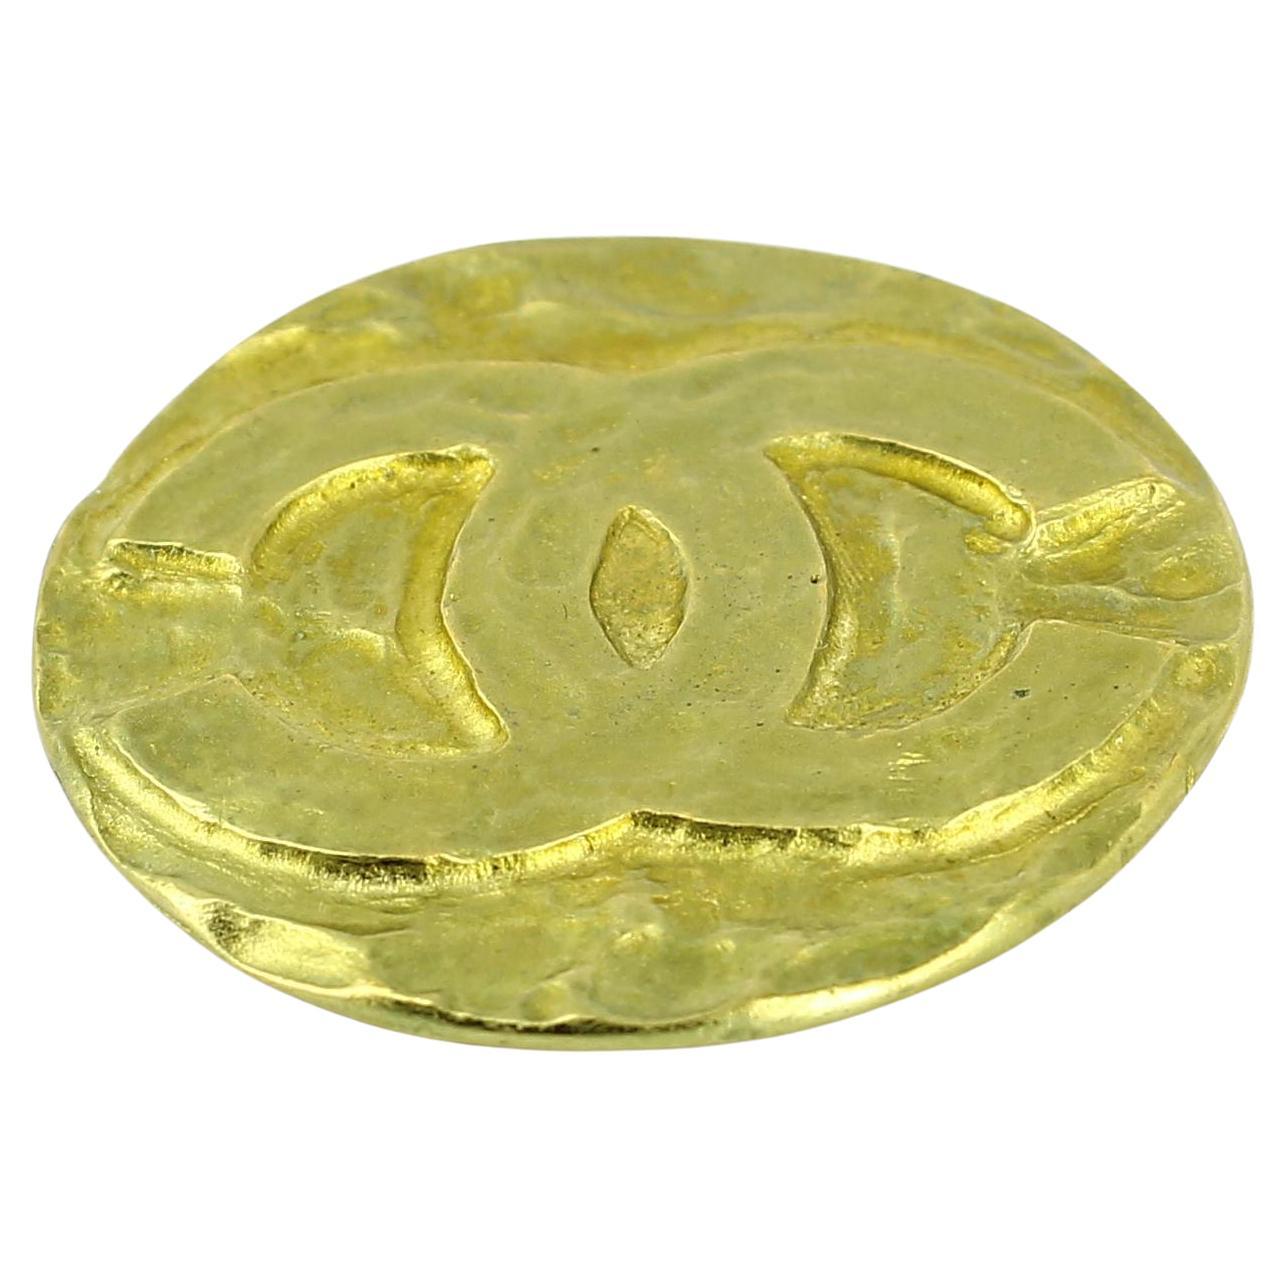 1995 Chanel Golden Double C Center Brooch For Sale